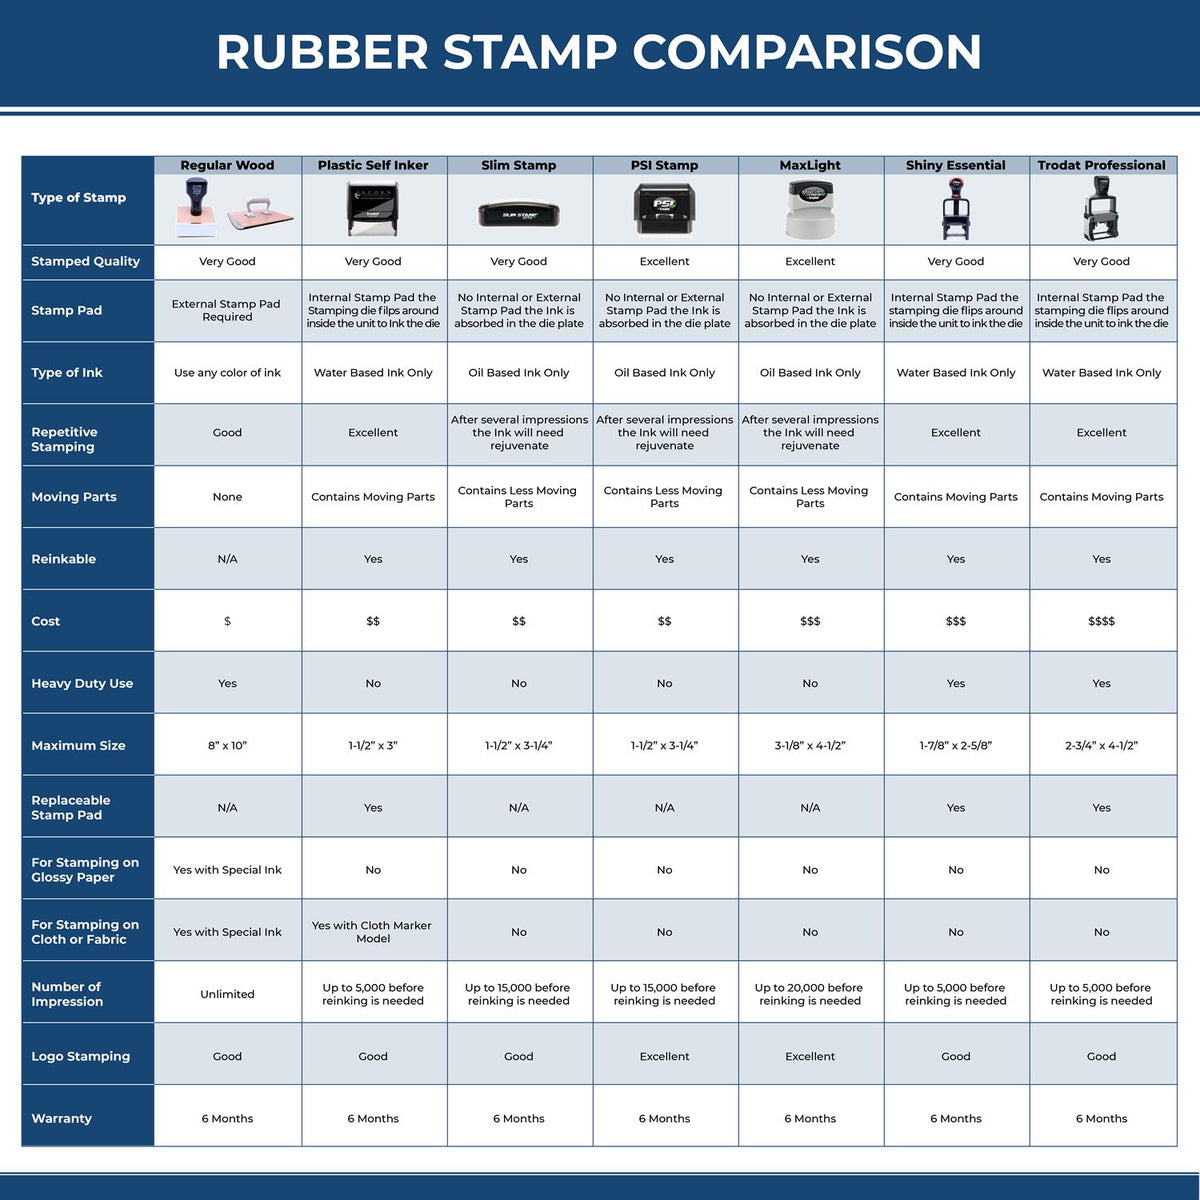 A comparison chart for the different types of mount models available for the Slim Pre-Inked Guam Professional Geologist Seal Stamp